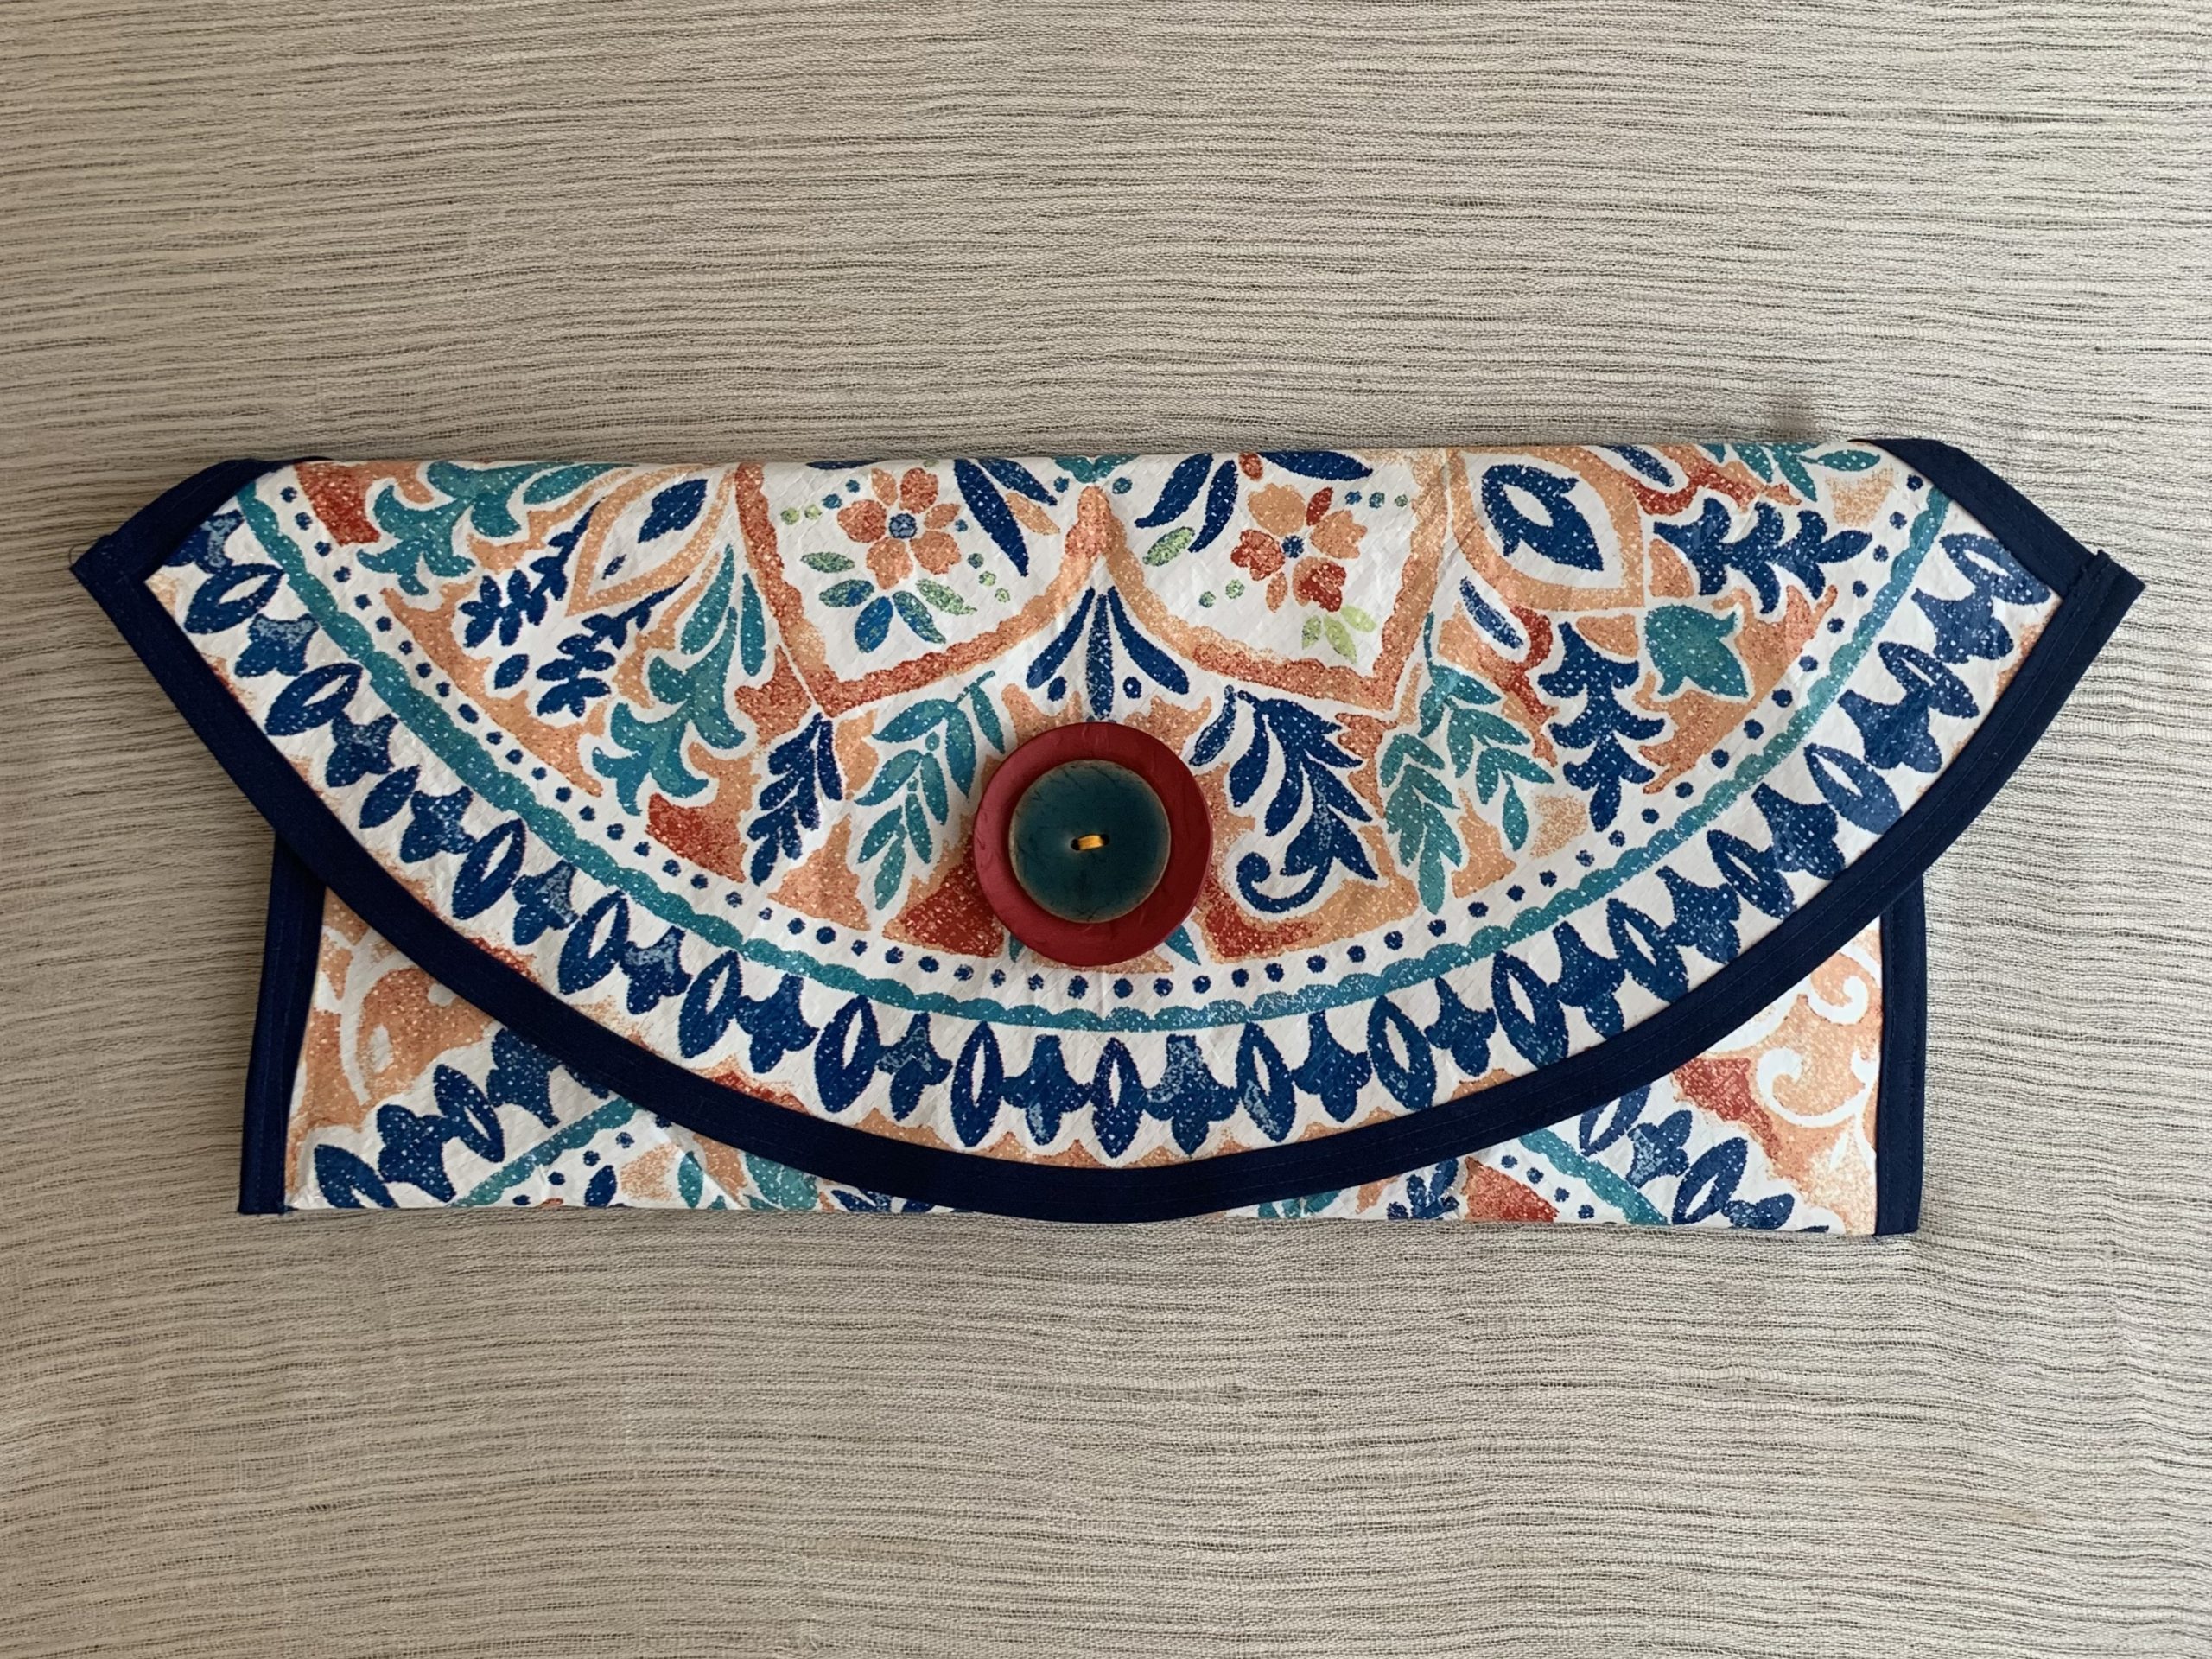 Tropical- a handcrafted purse